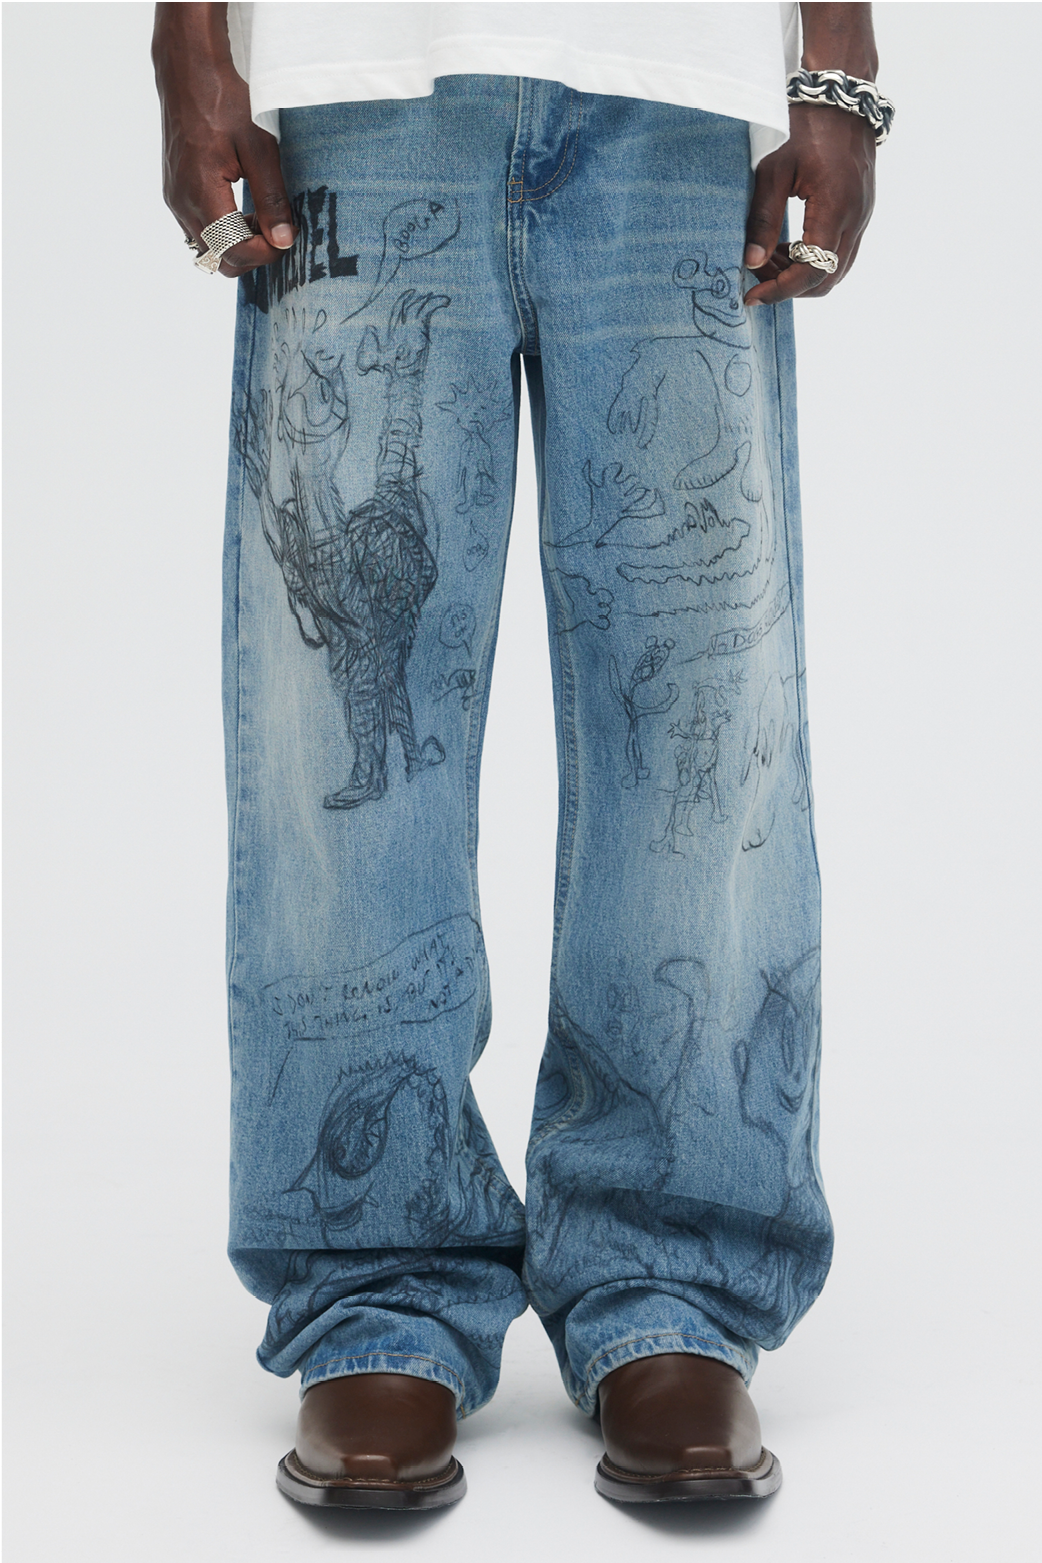 Stretch bootcut jeans